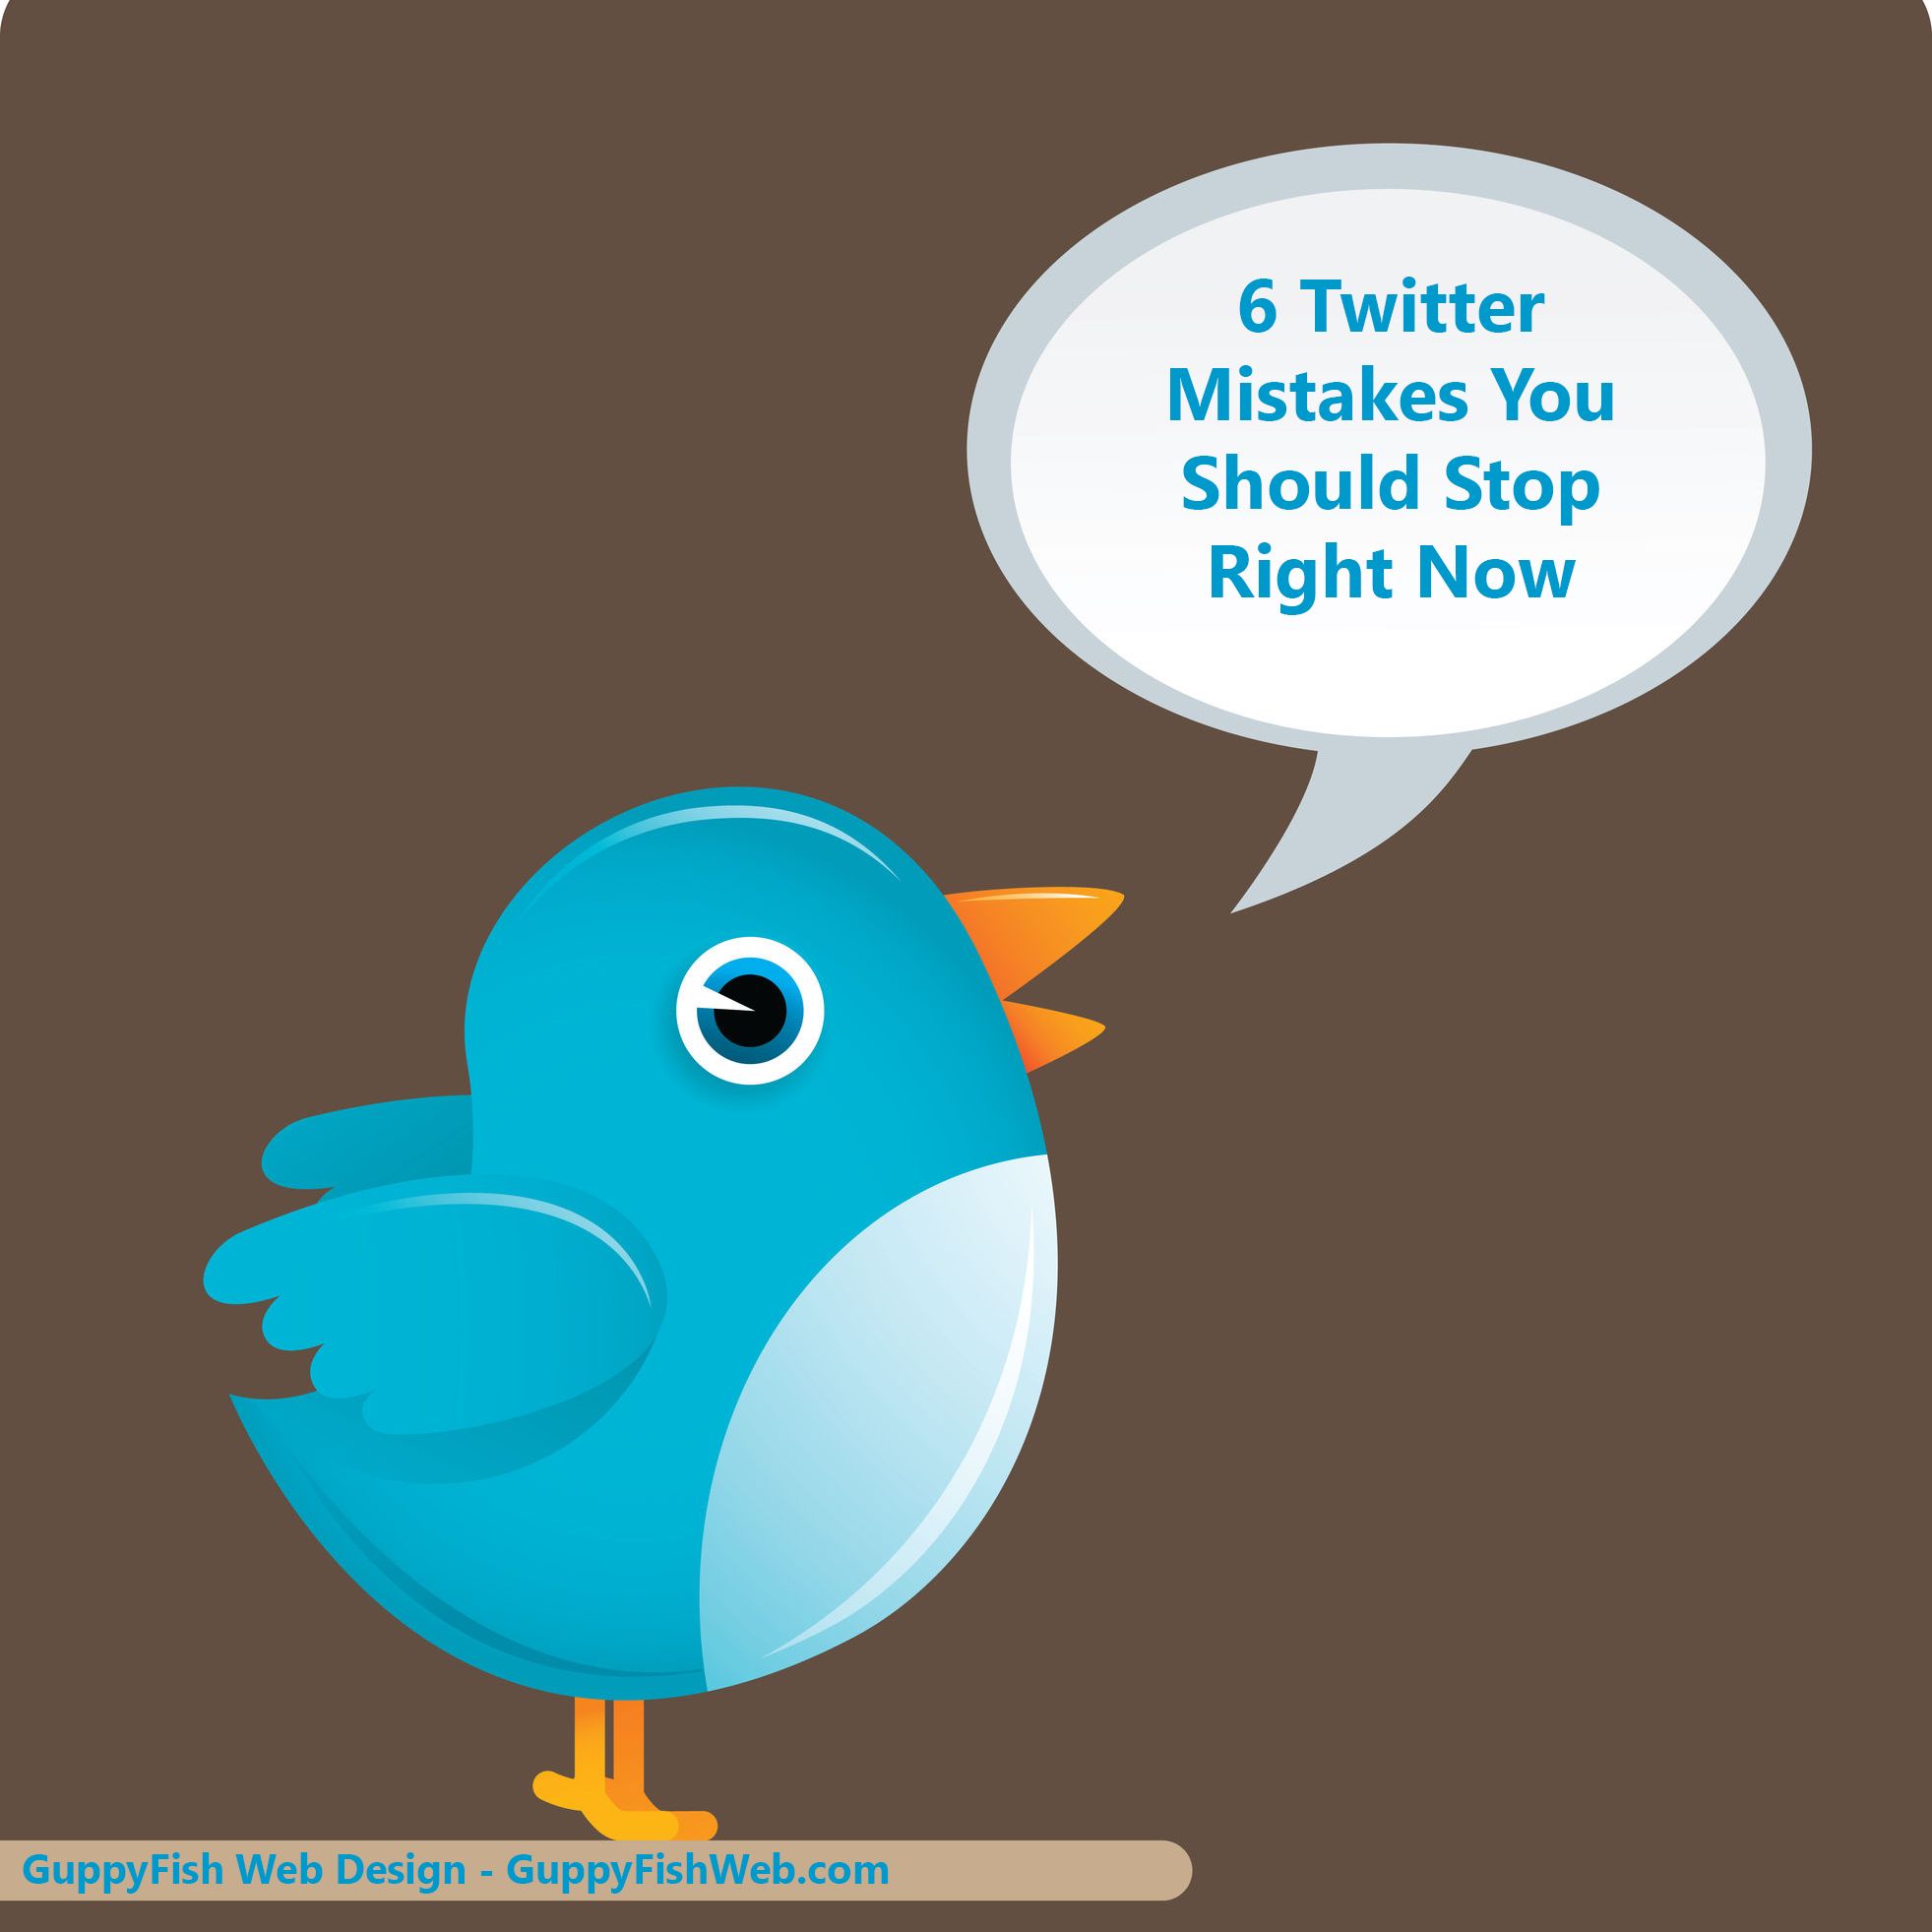 6 Twitter mistakes you should stop right now